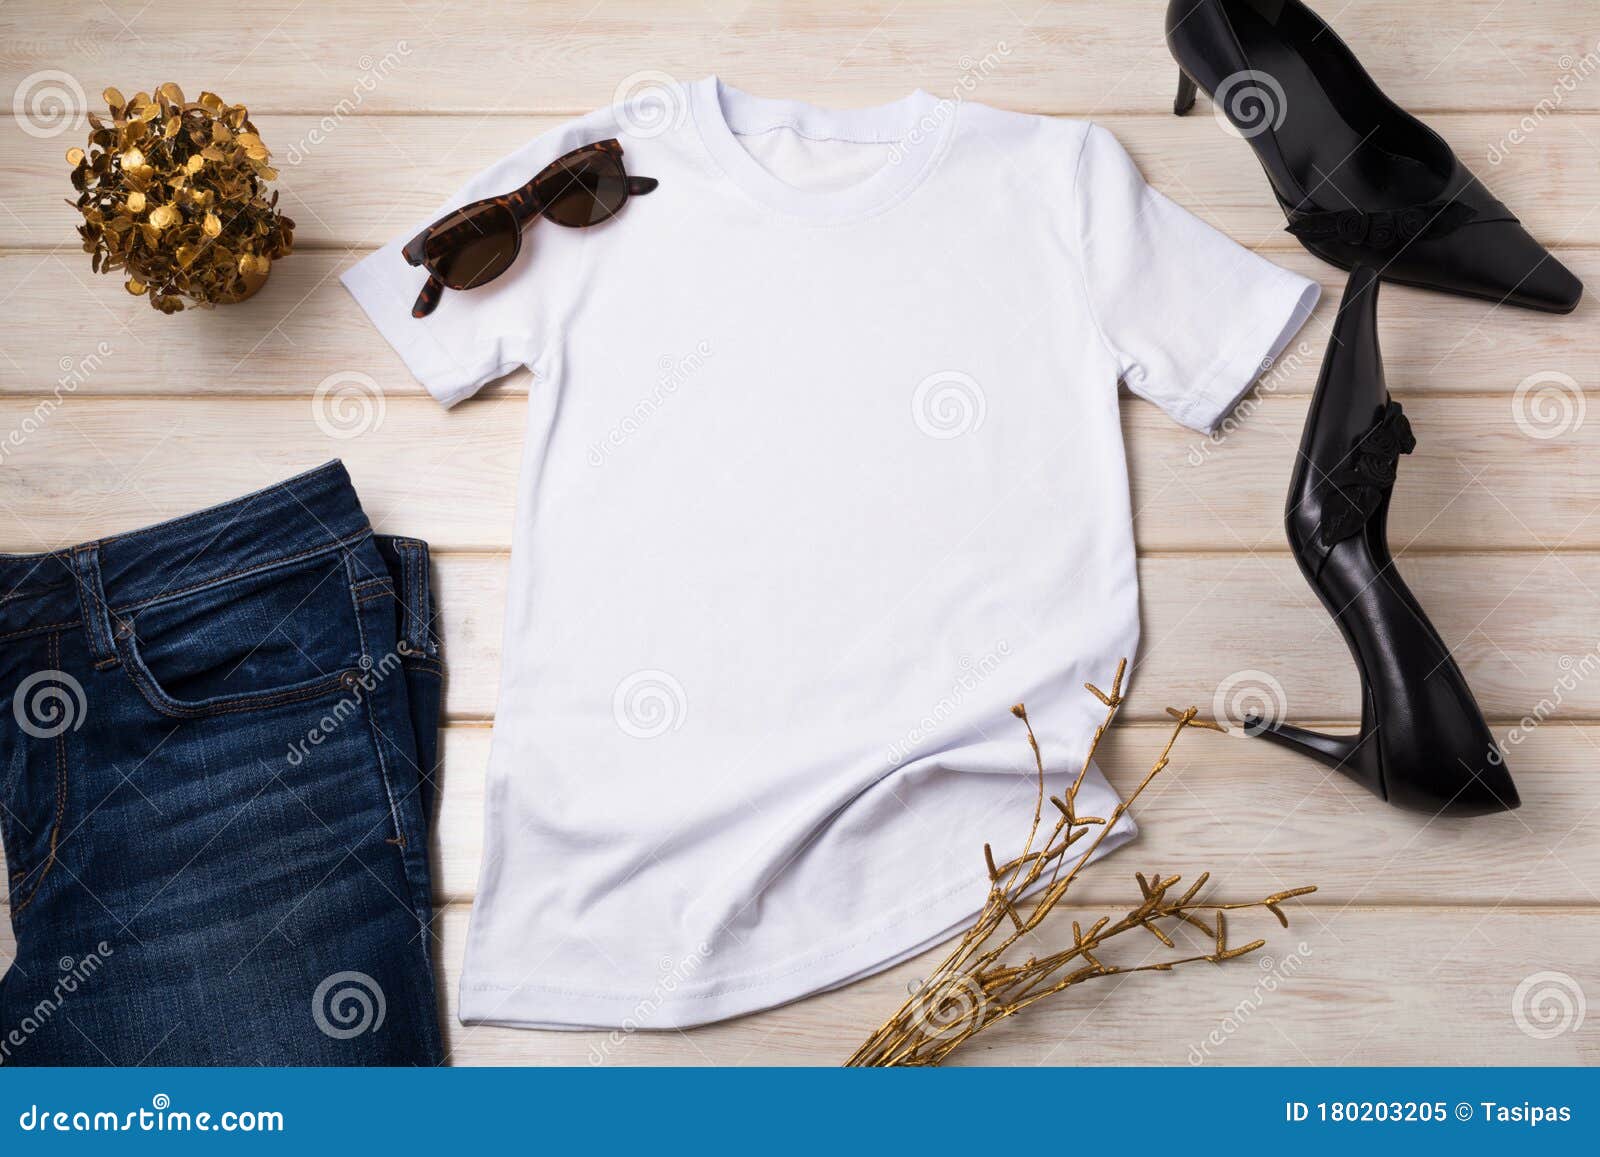 Download Women T Shirt Mockup With Black Heels Stock Image Image Of Fabric Outfit 180203205